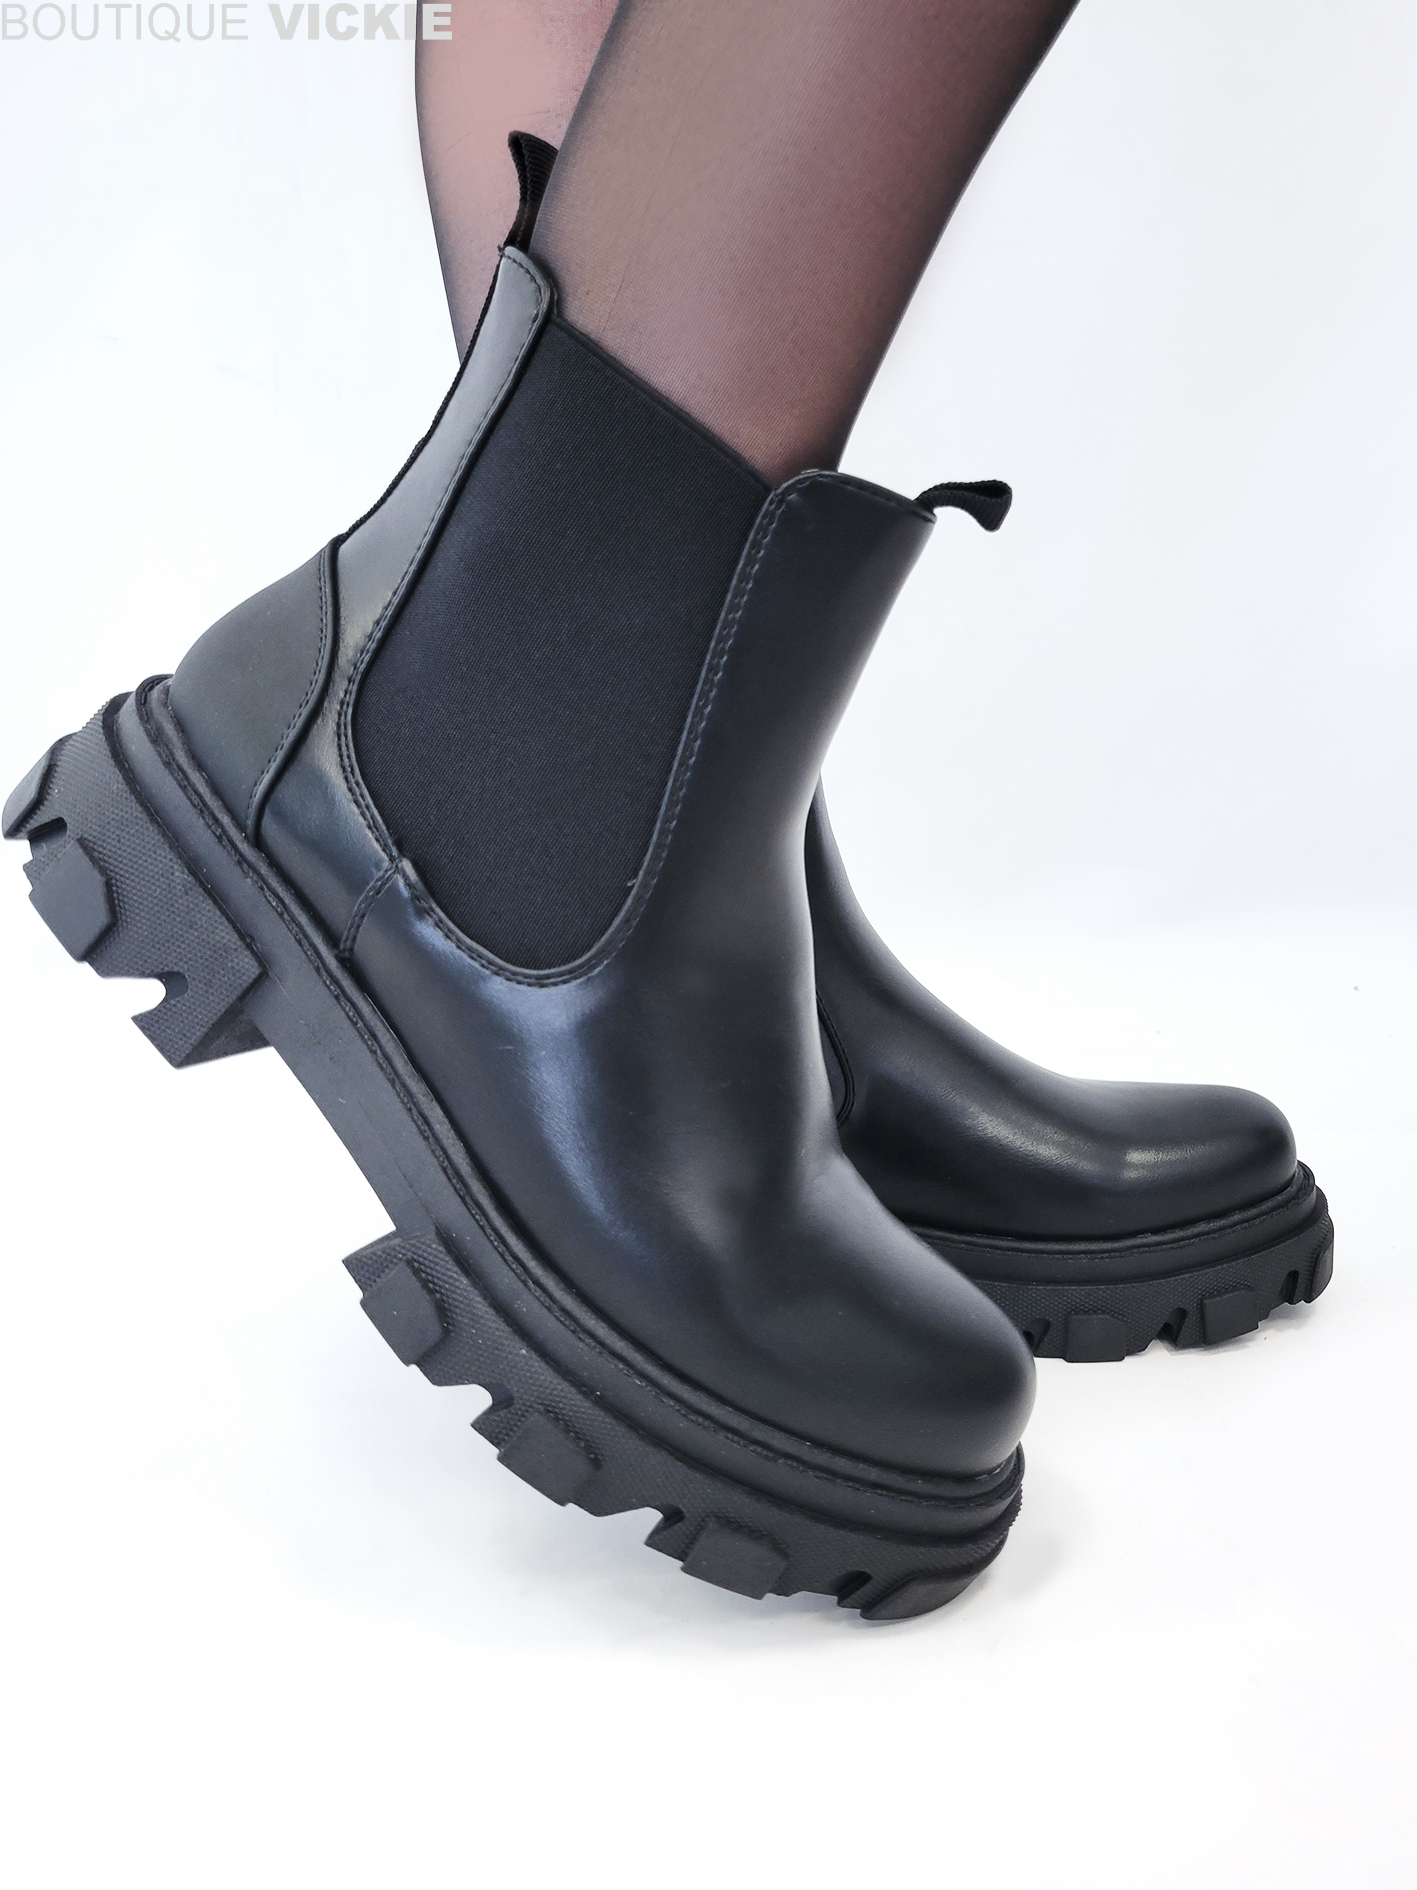 BOTTES - 6810 - CHAUSSURES